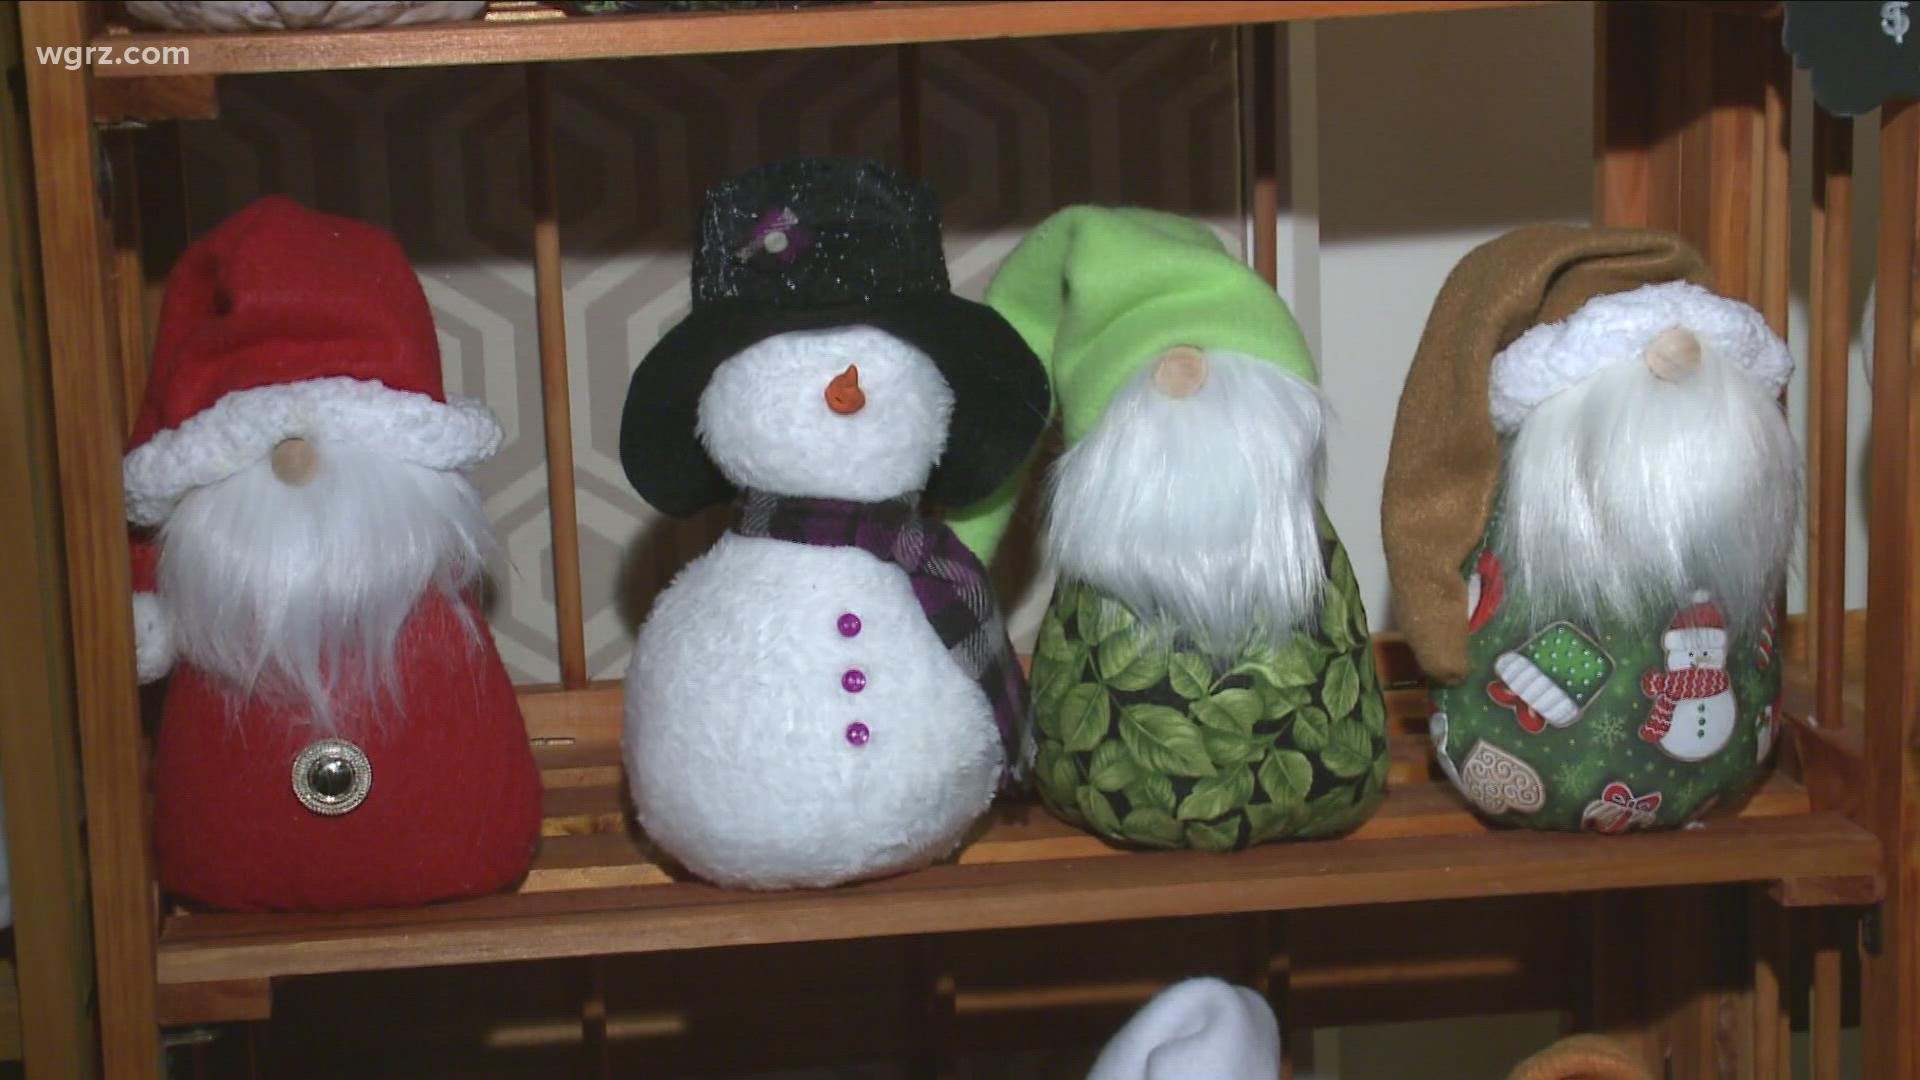 It was a craft lovers delight with a Christmas showcase at the Wurlitzer. Many handmade items, some with a Buffalo theme, but definitely with a holiday flavor.